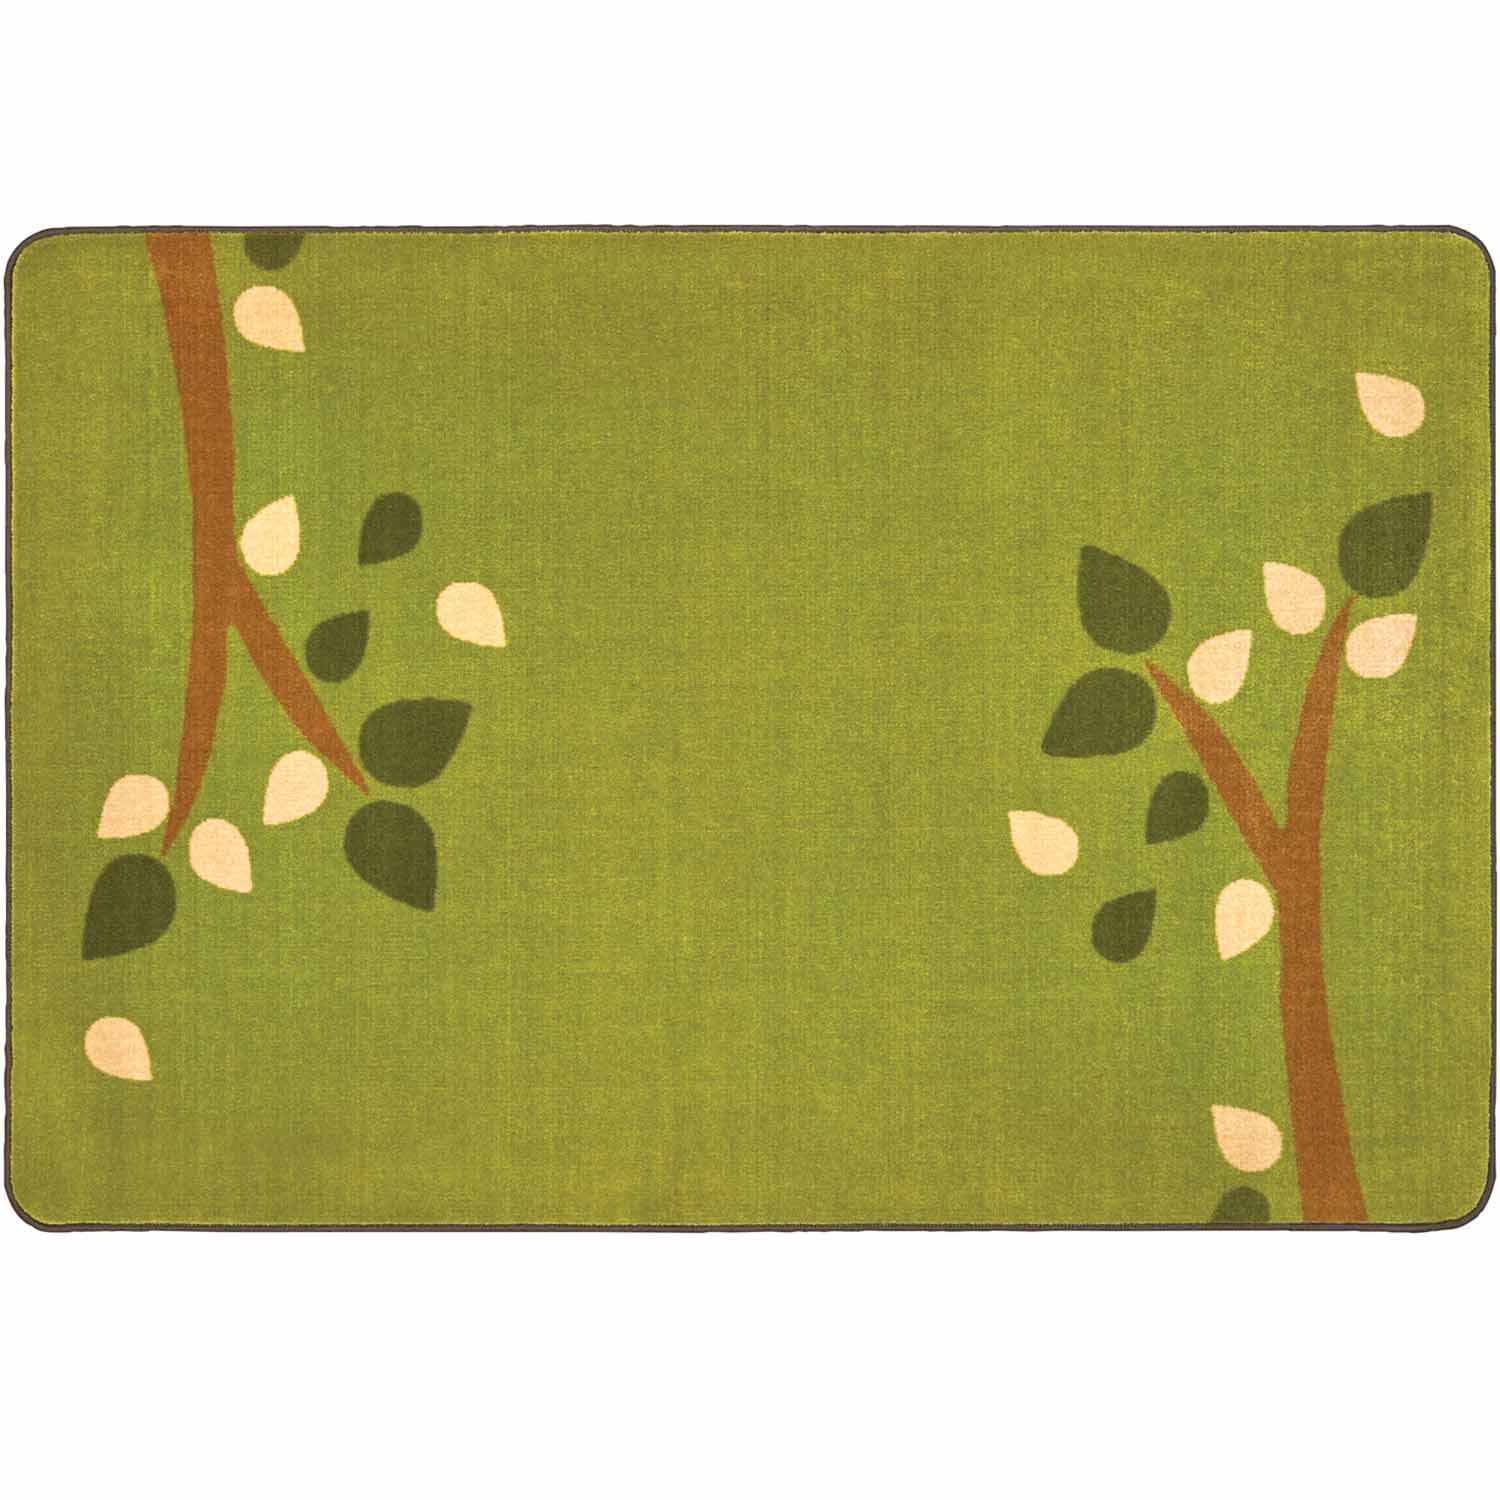 KIDSoft™ Branching Out Rug, Green, Rectangle 6' x 9'